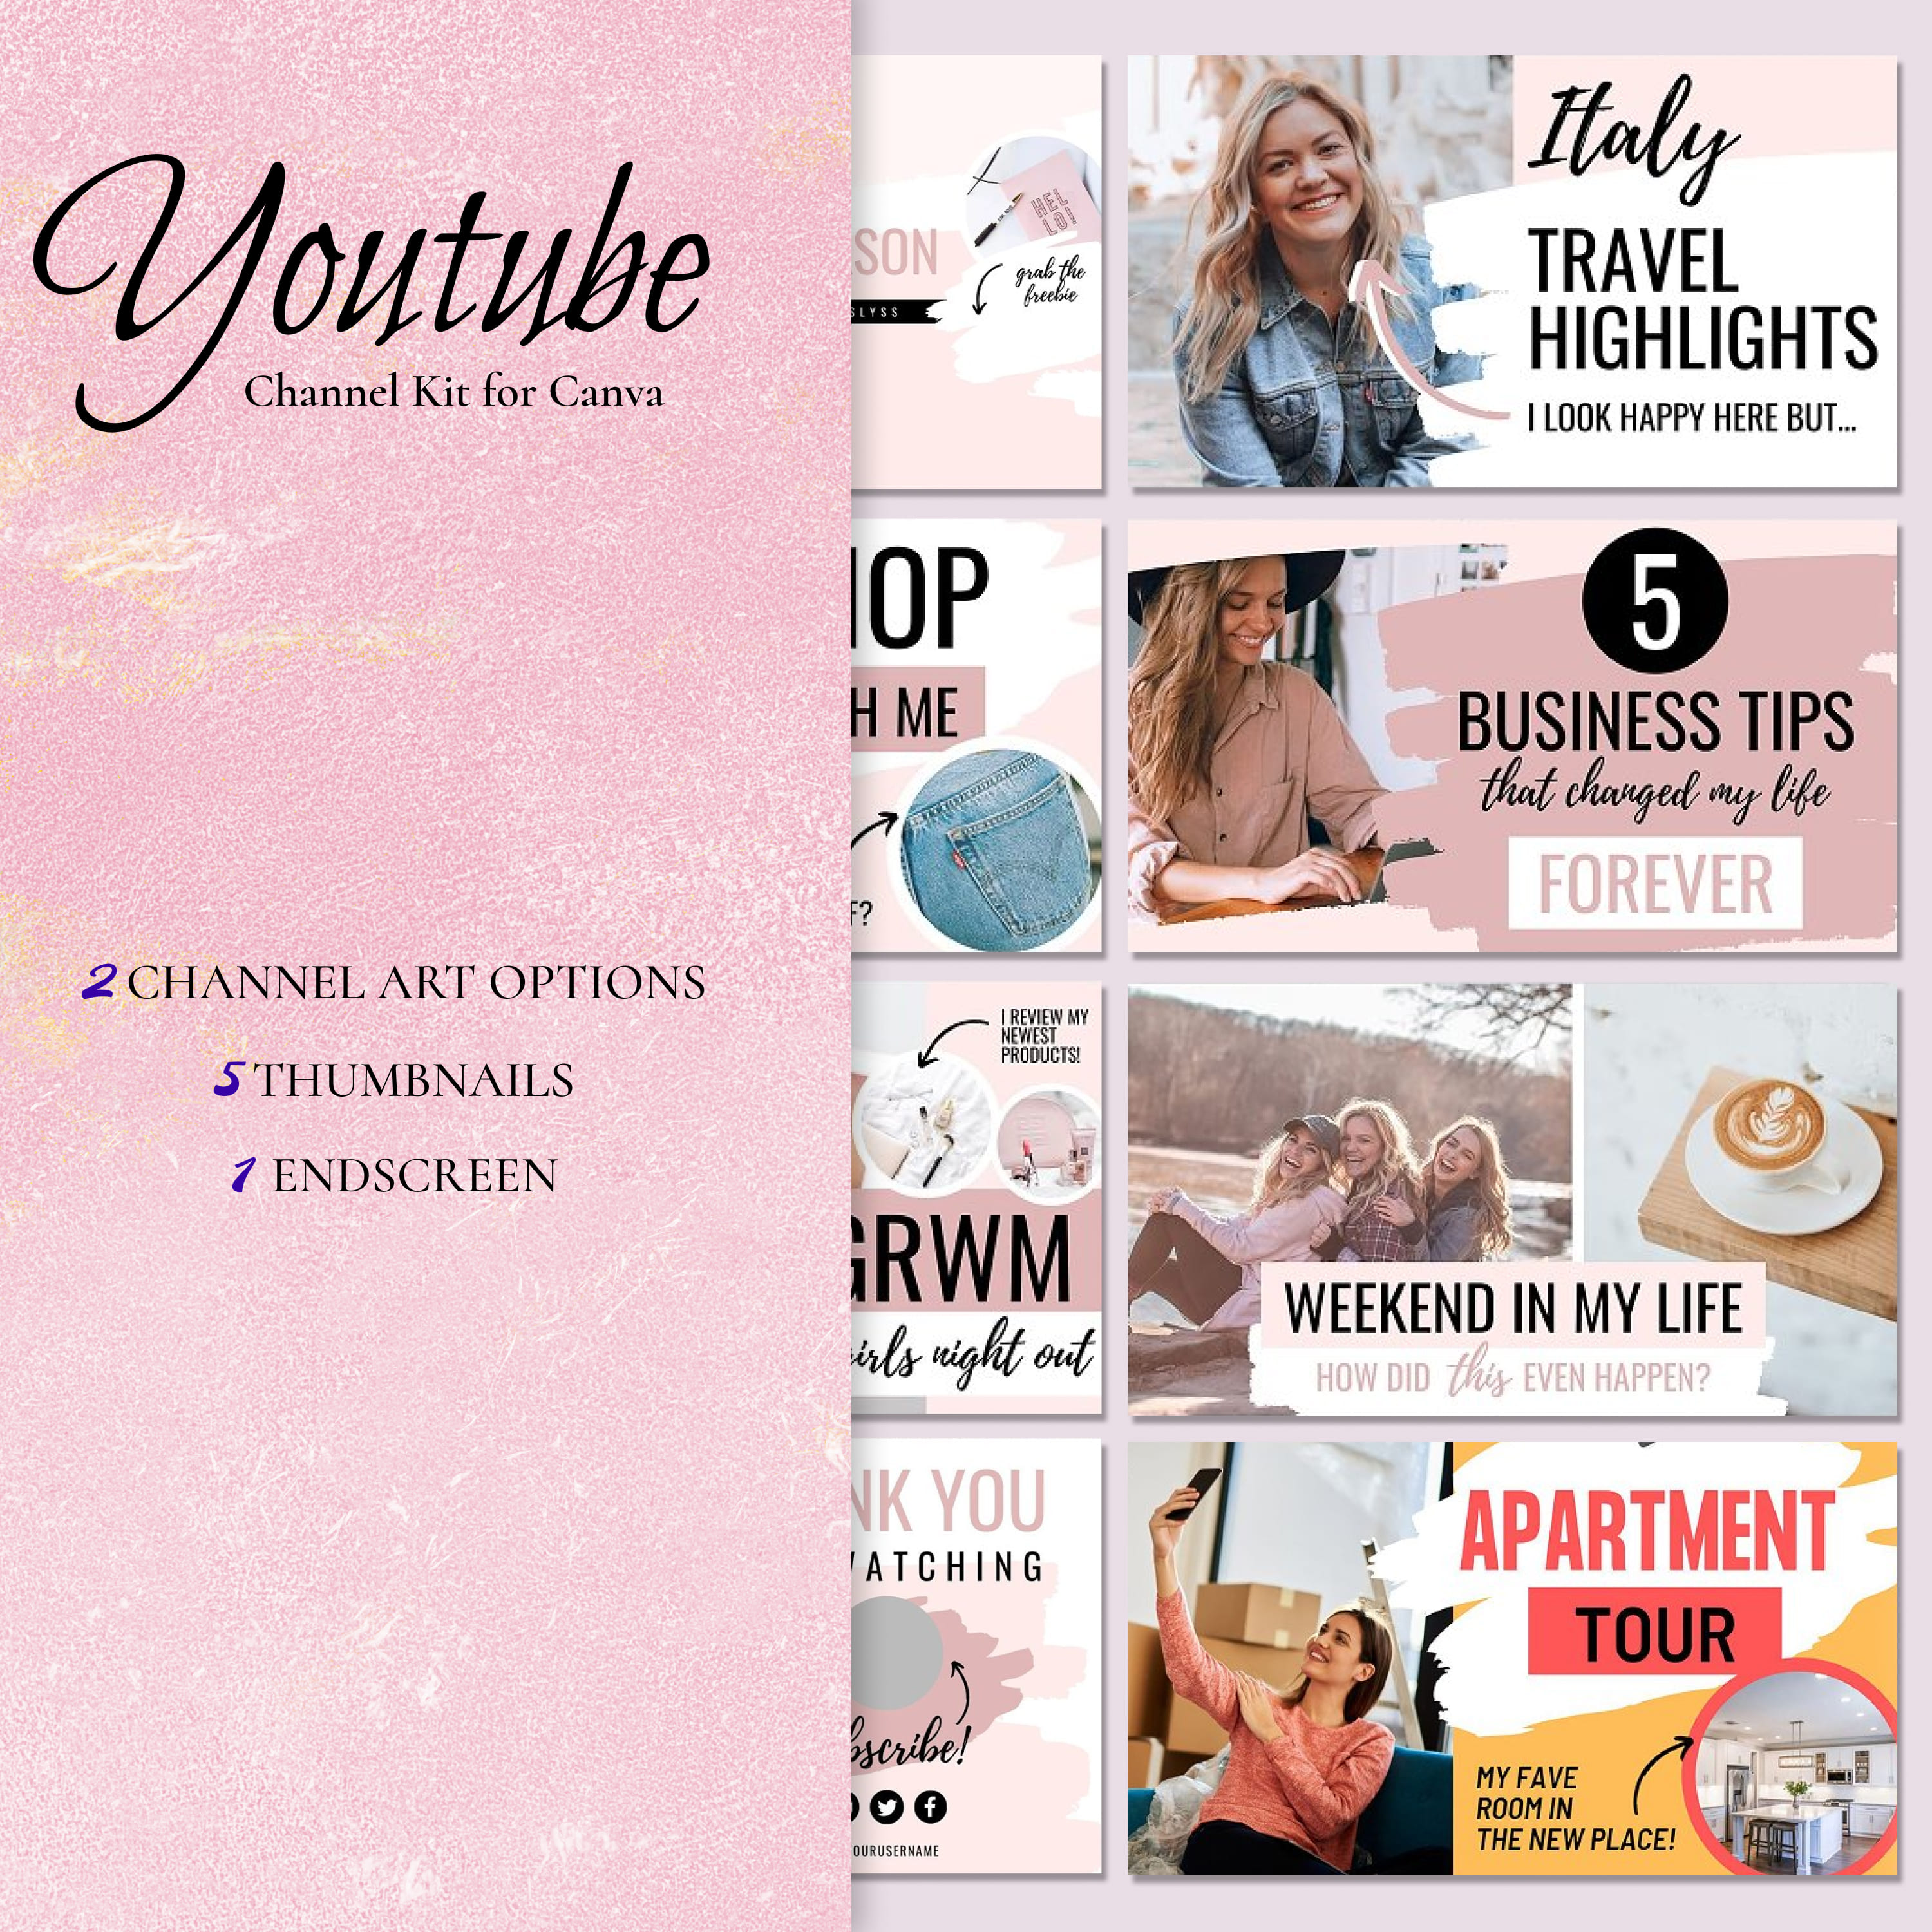 Youtube Channel Kit for Canva.